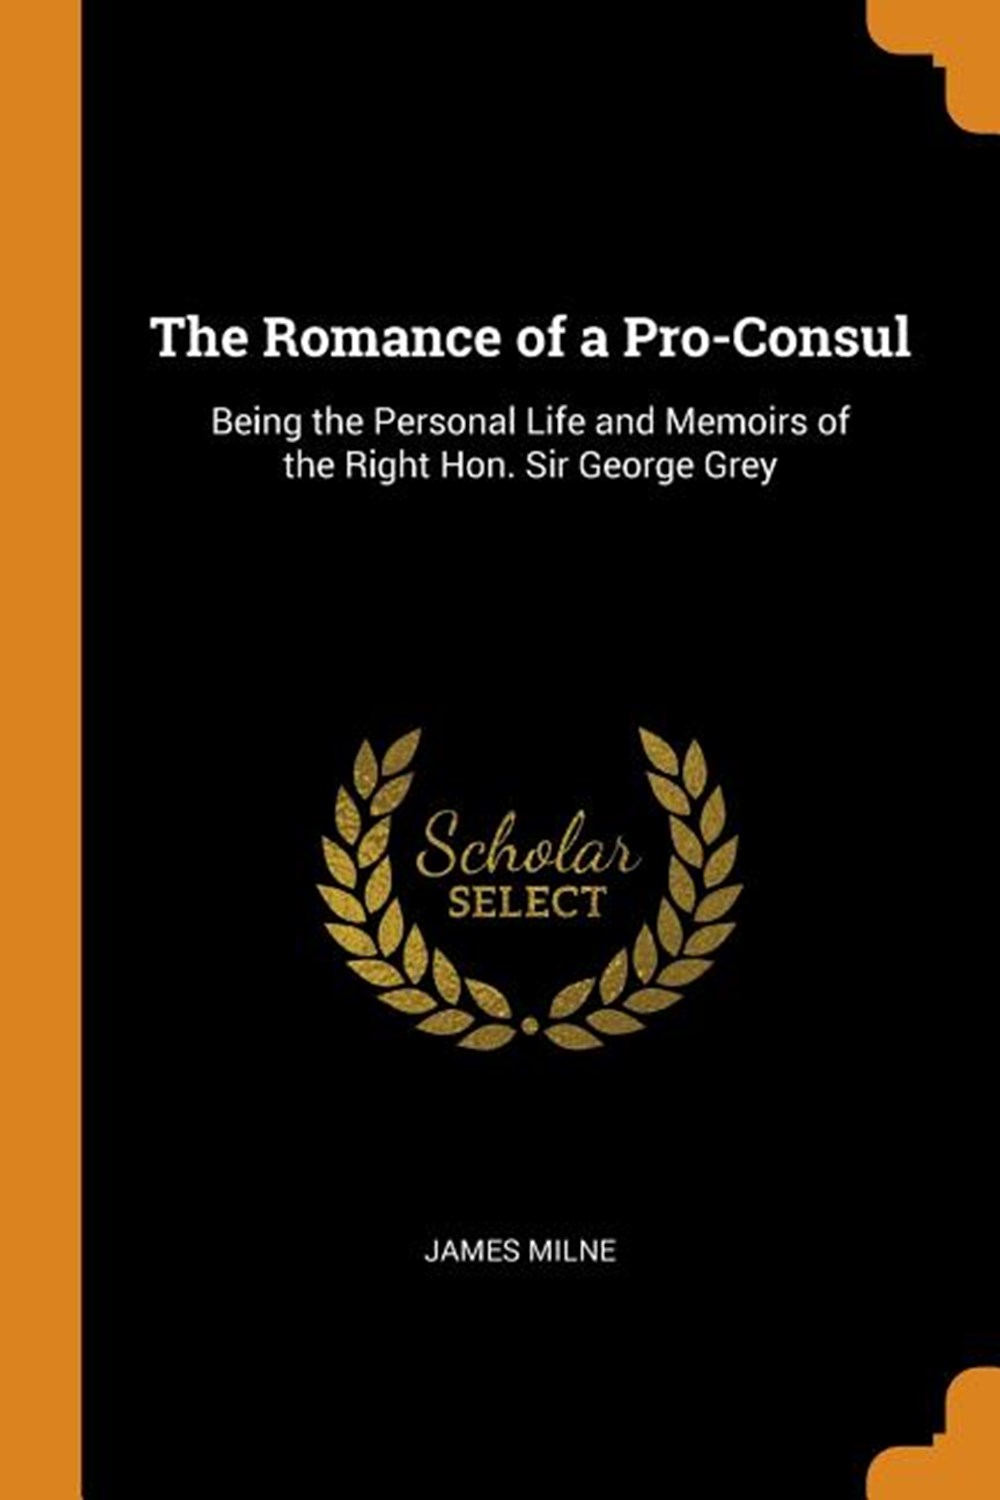 Romance of a Pro-Consul: Being the Personal Life and Memoirs of the Right Hon. Sir George Grey